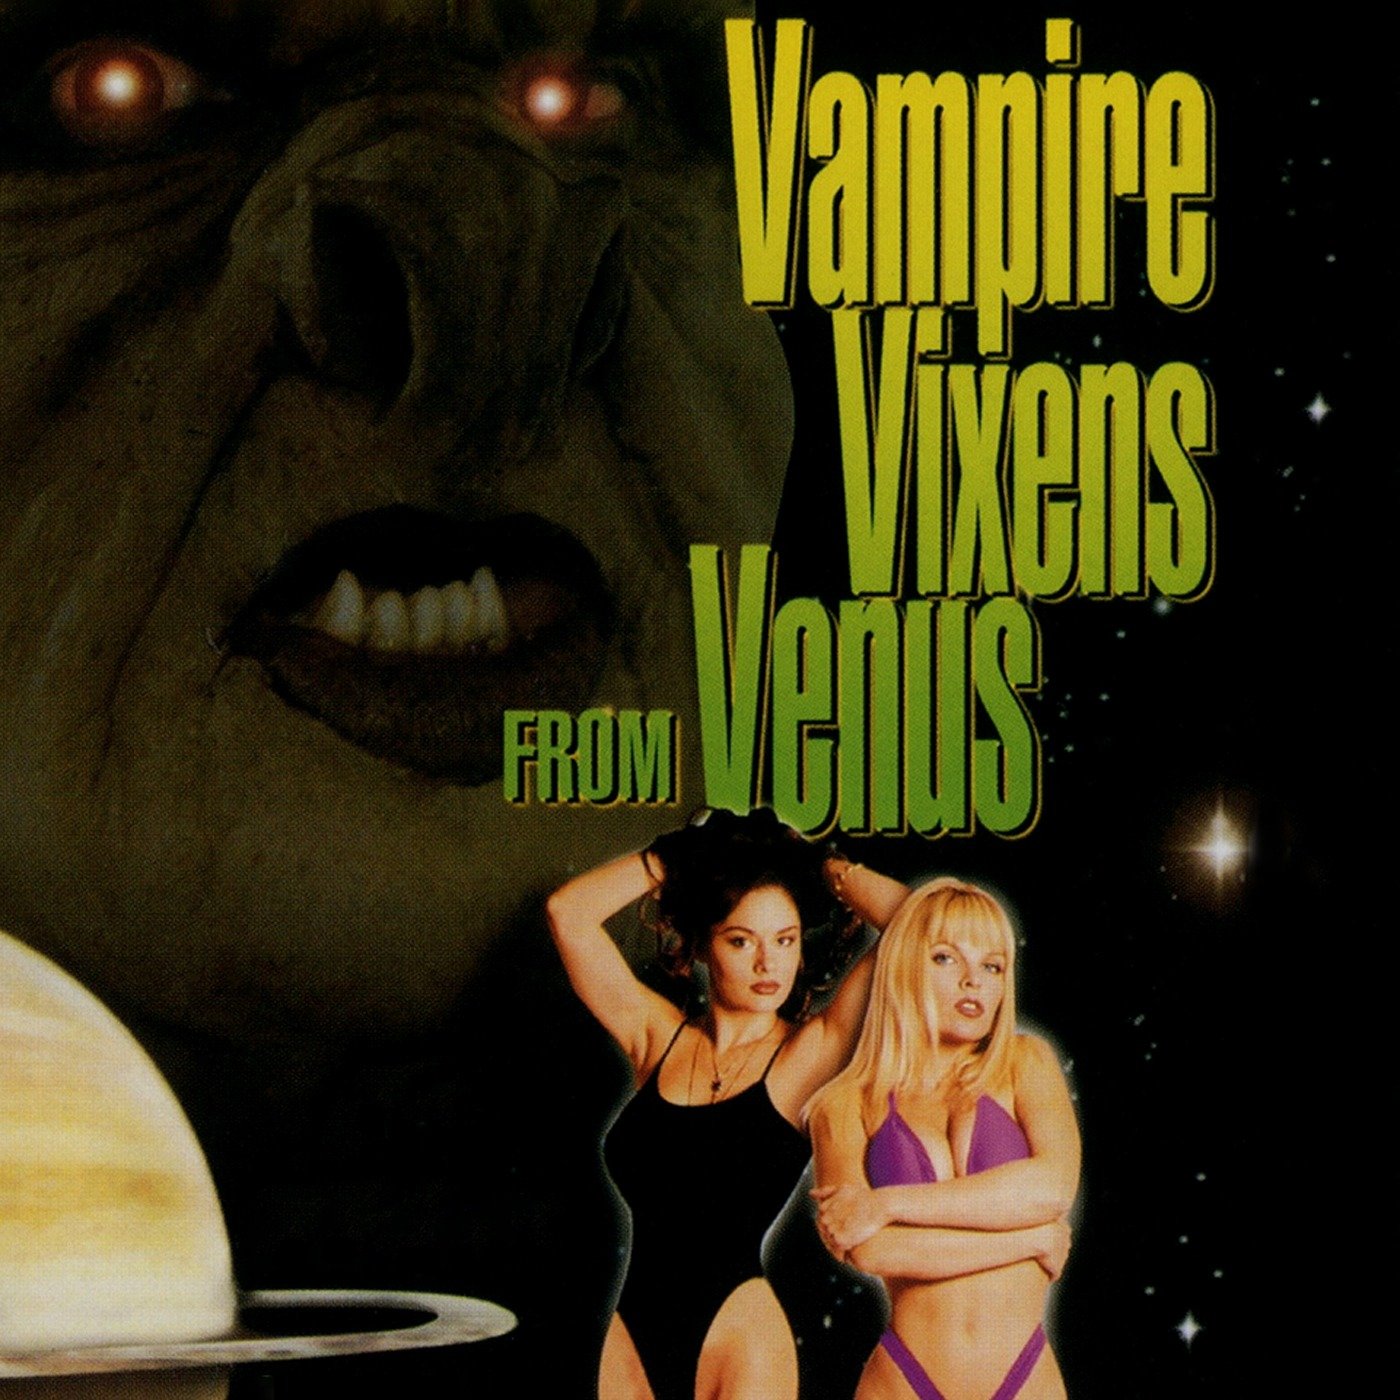 amardeep rahl recommends Vixens From Venus Online